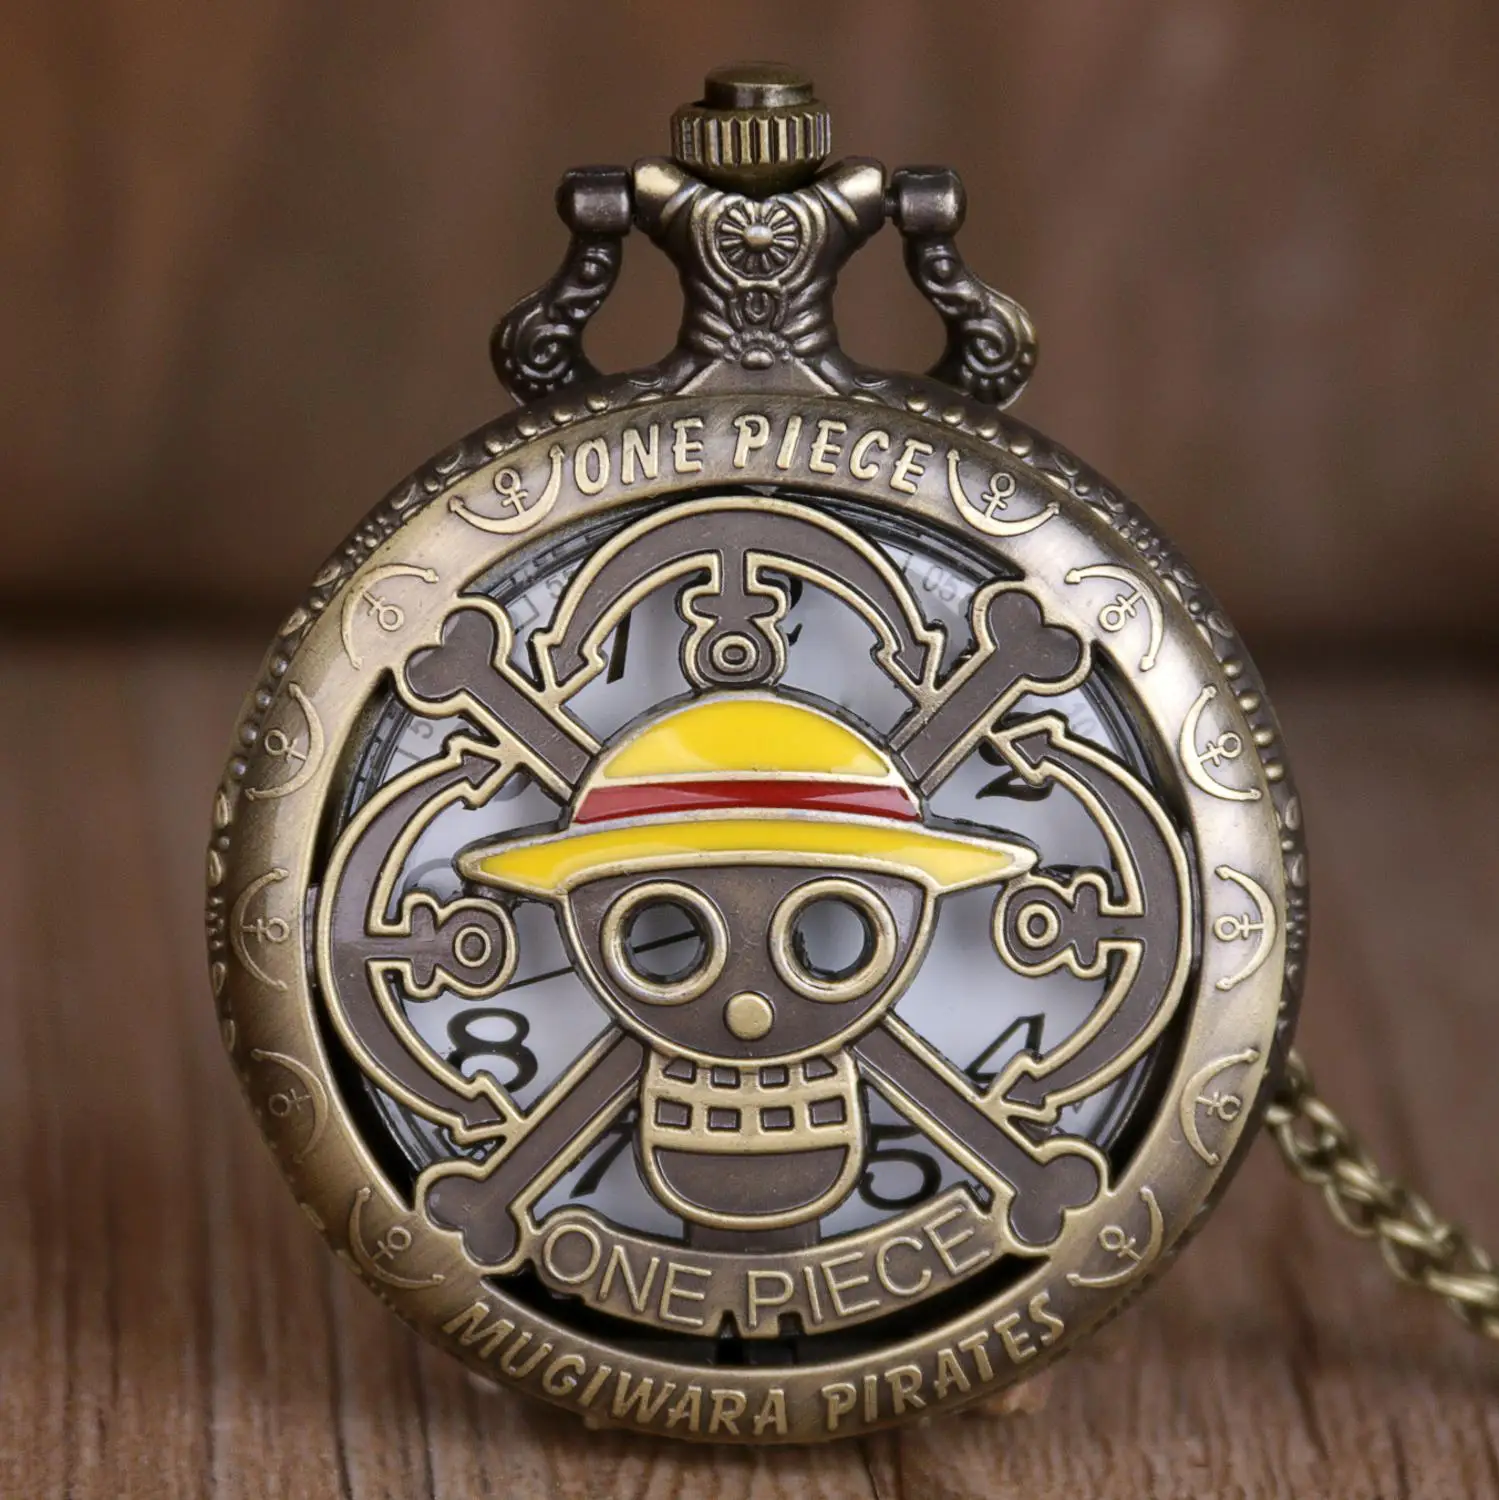 Top Brand Anime Pocket Watch Hot One-piece Skull with Straw Hats Cover Chain Cool Comic Clock Best Gifts for Men Women Children